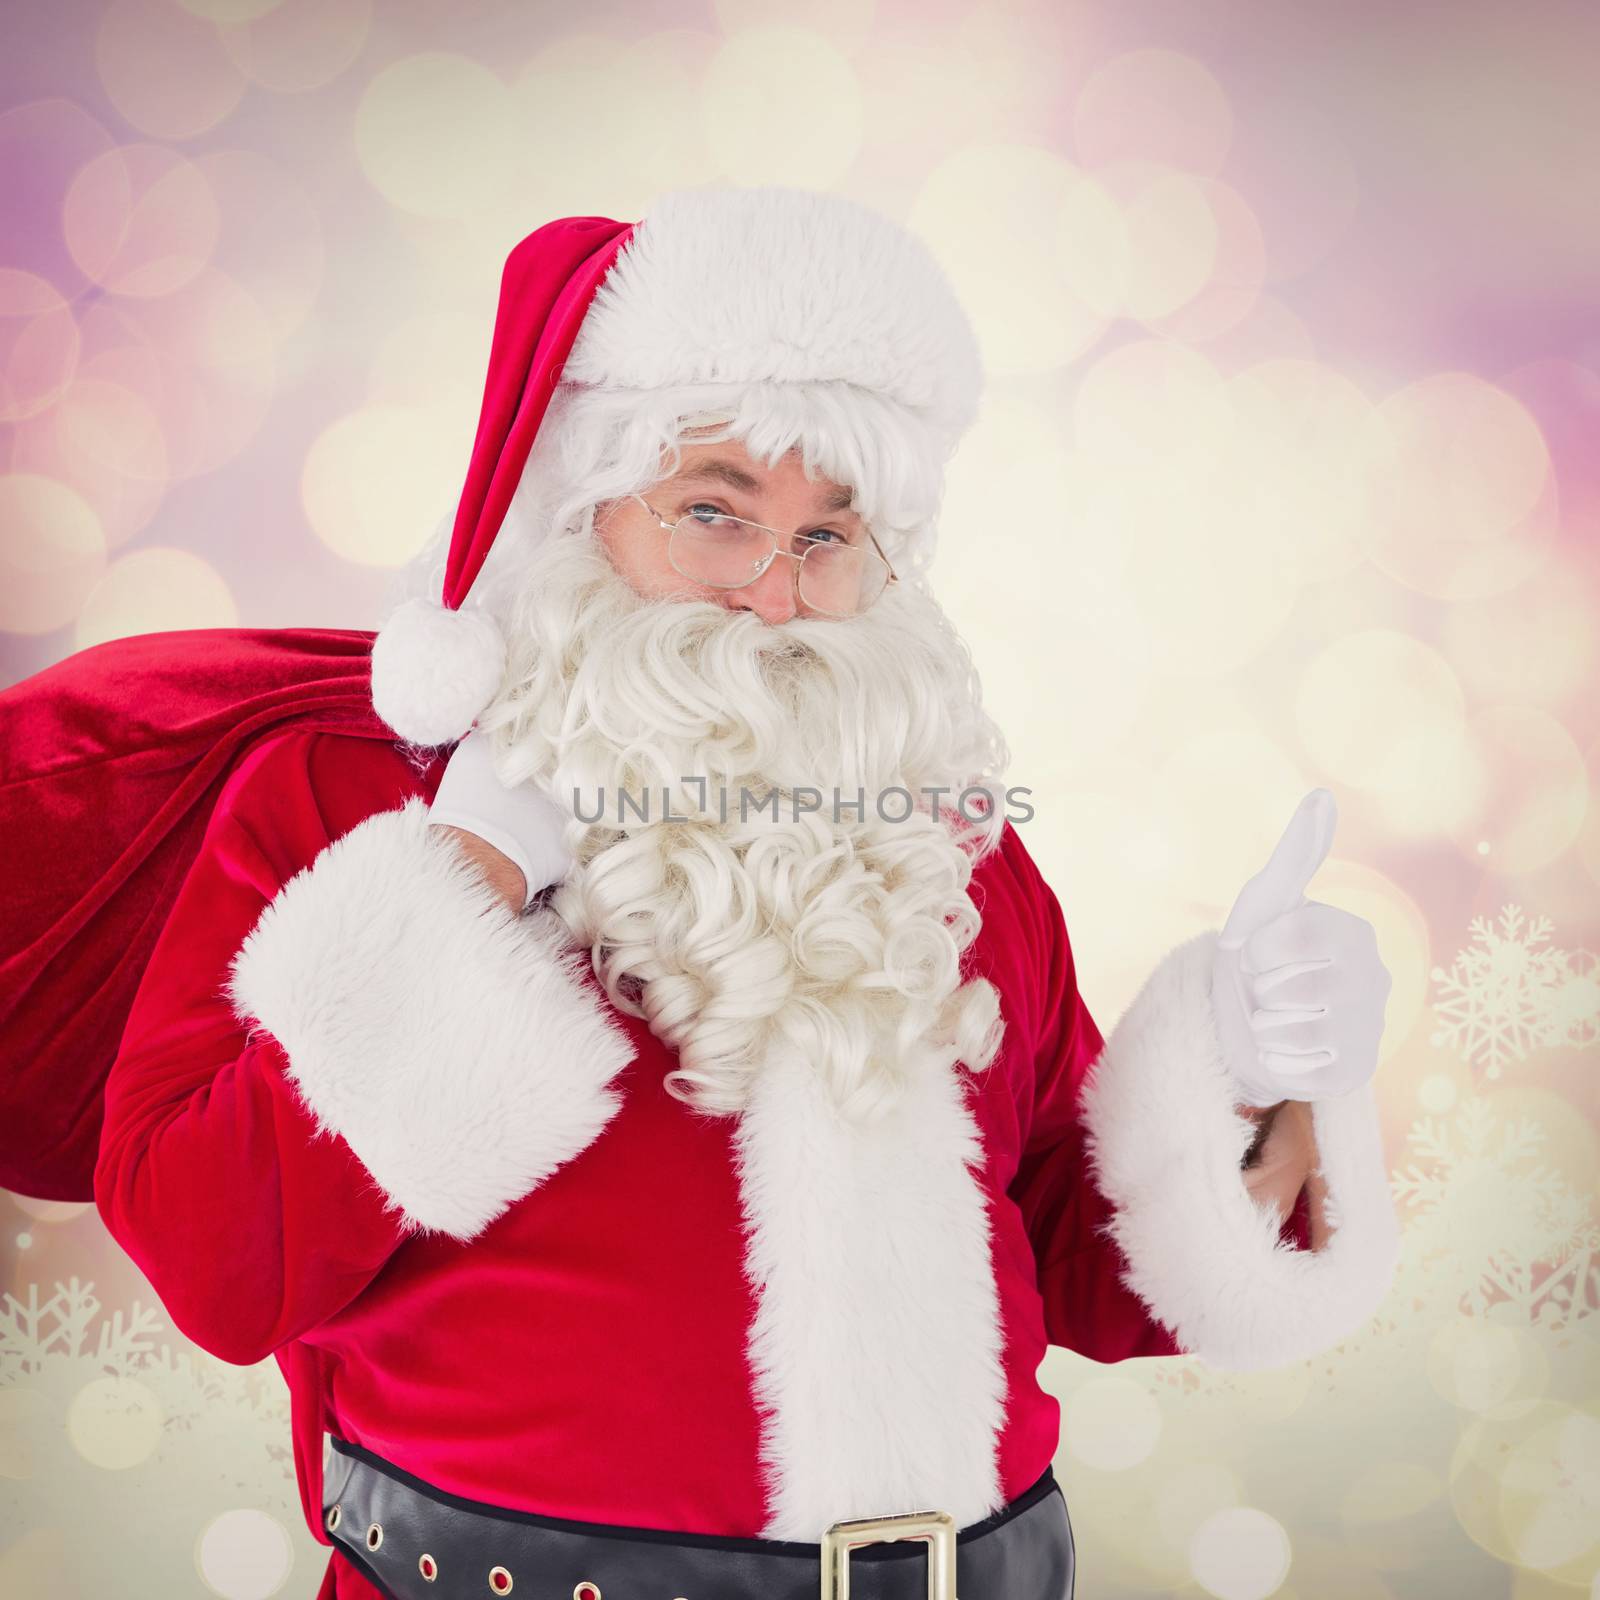 Santa claus with his sack and thumbs up against glowing christmas background